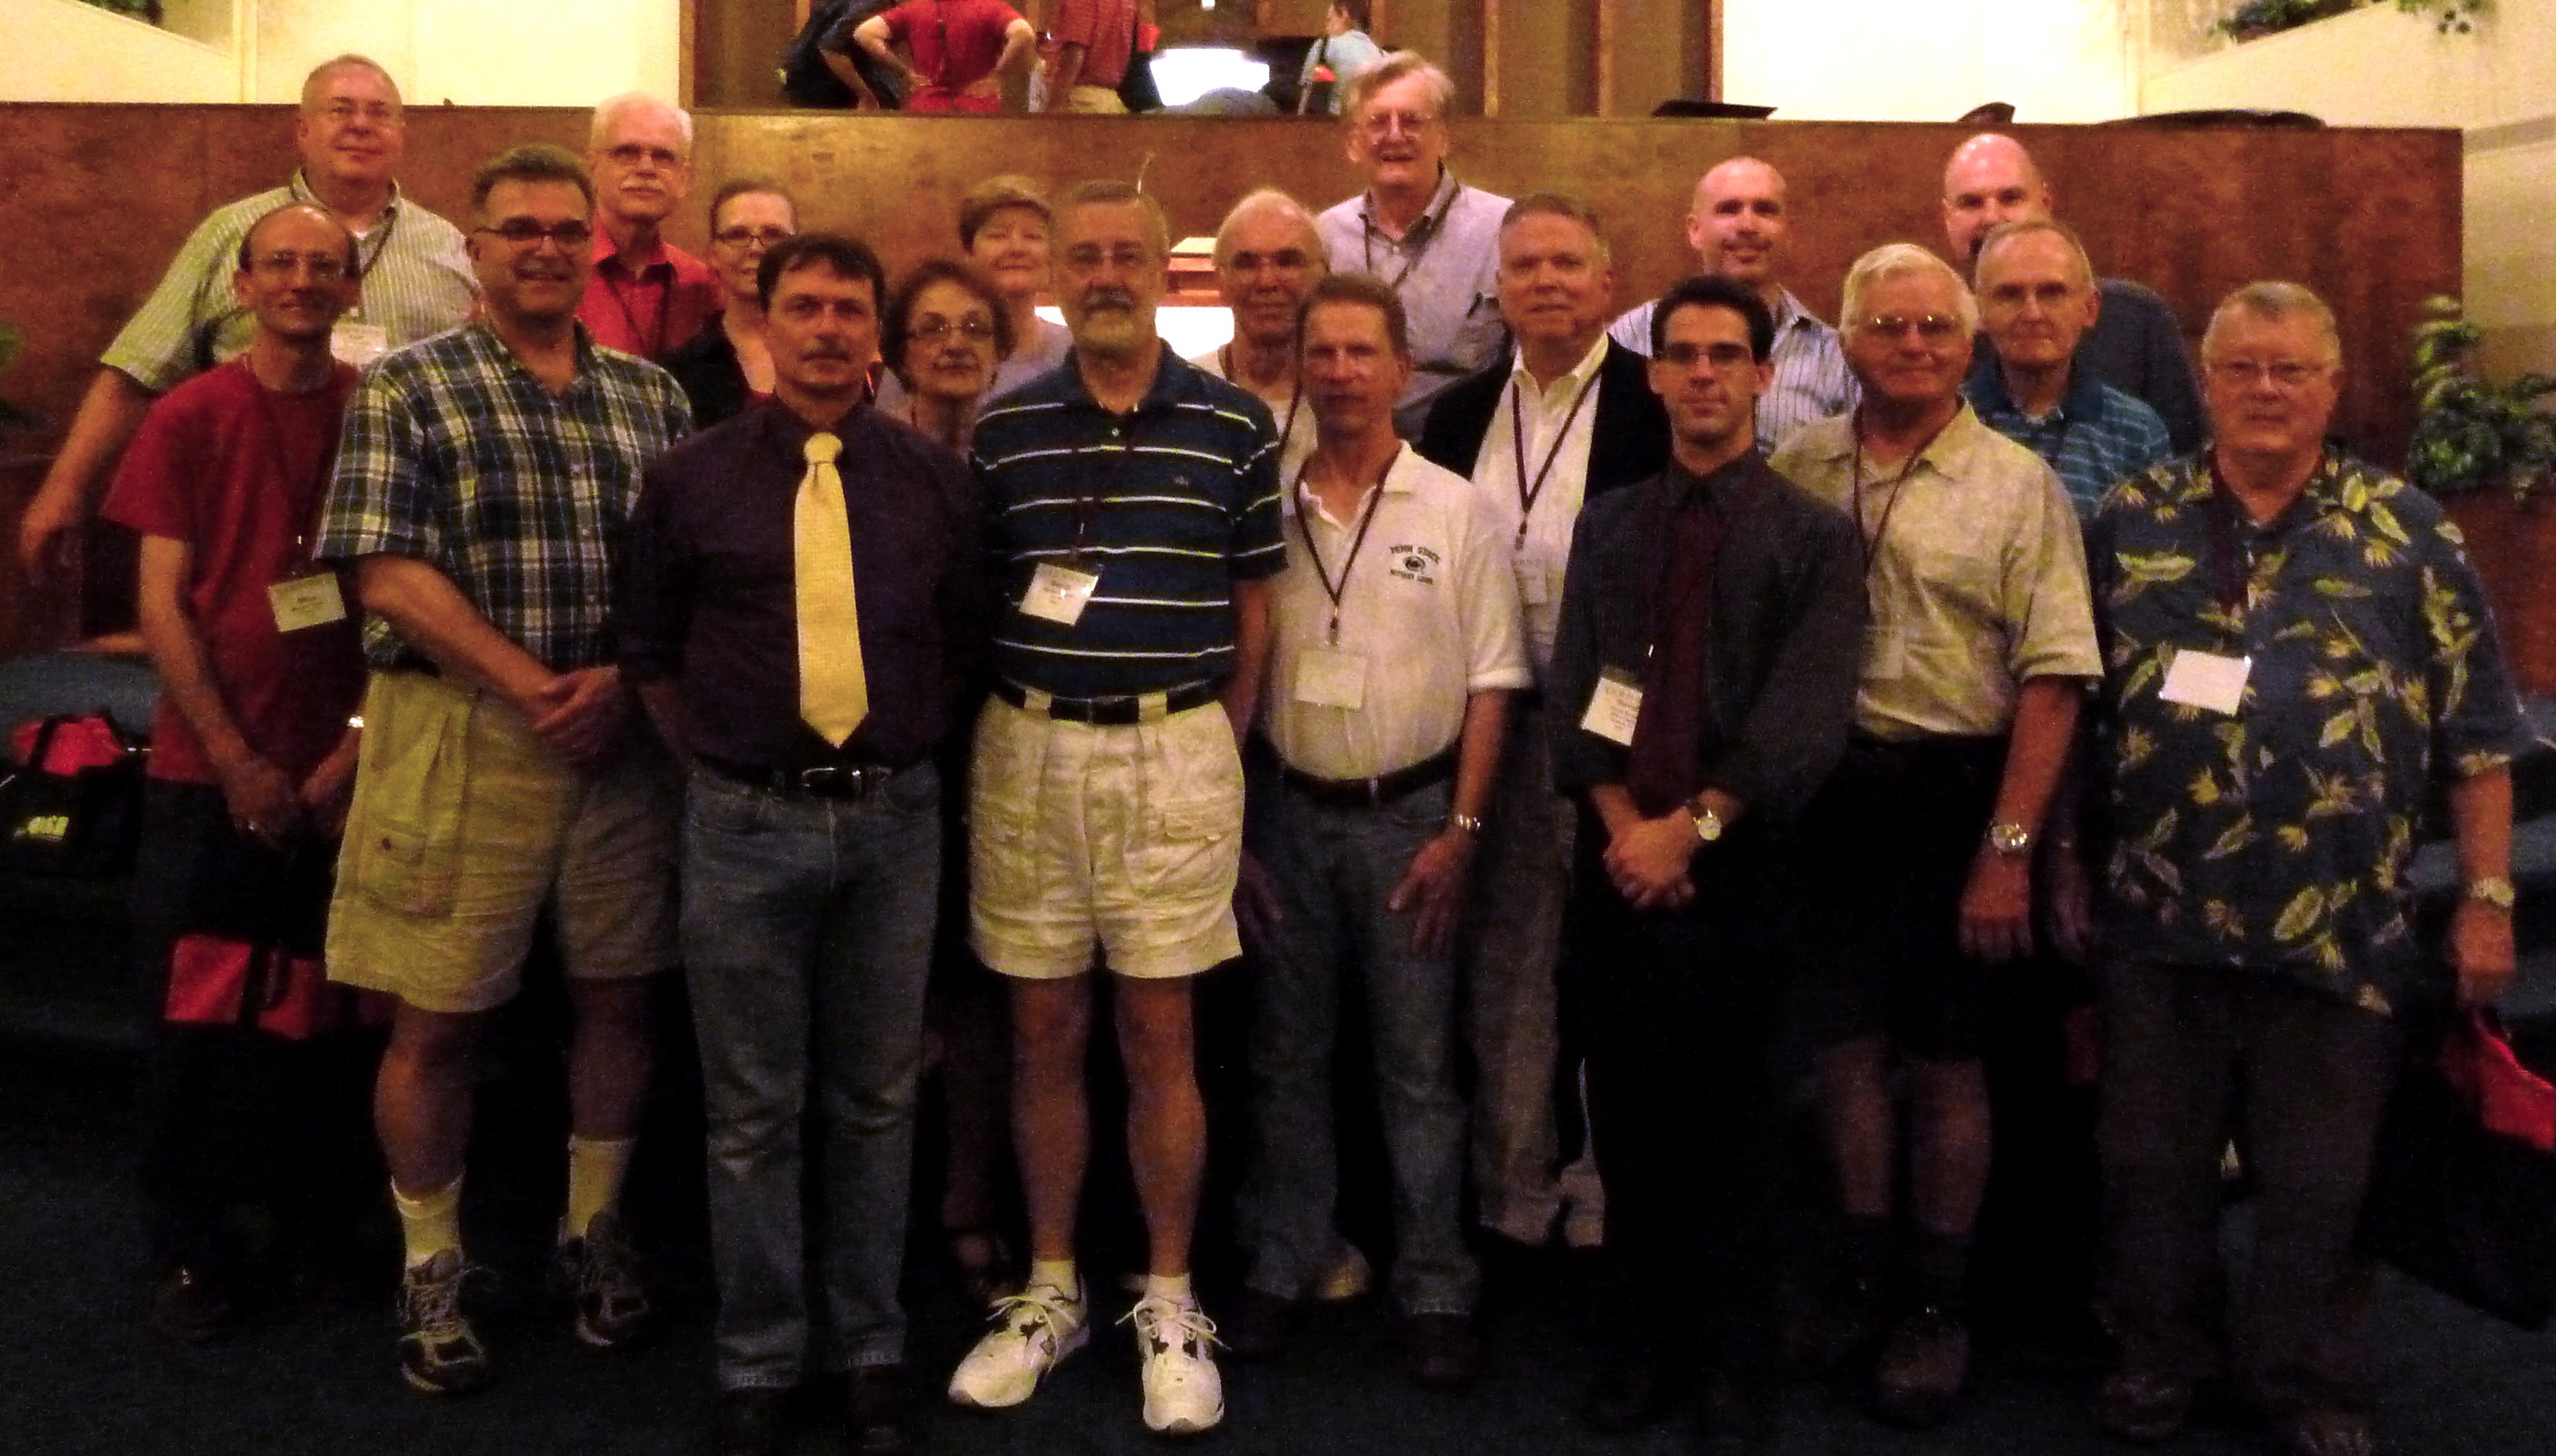 Hilbus members at OHS 2013 Convention